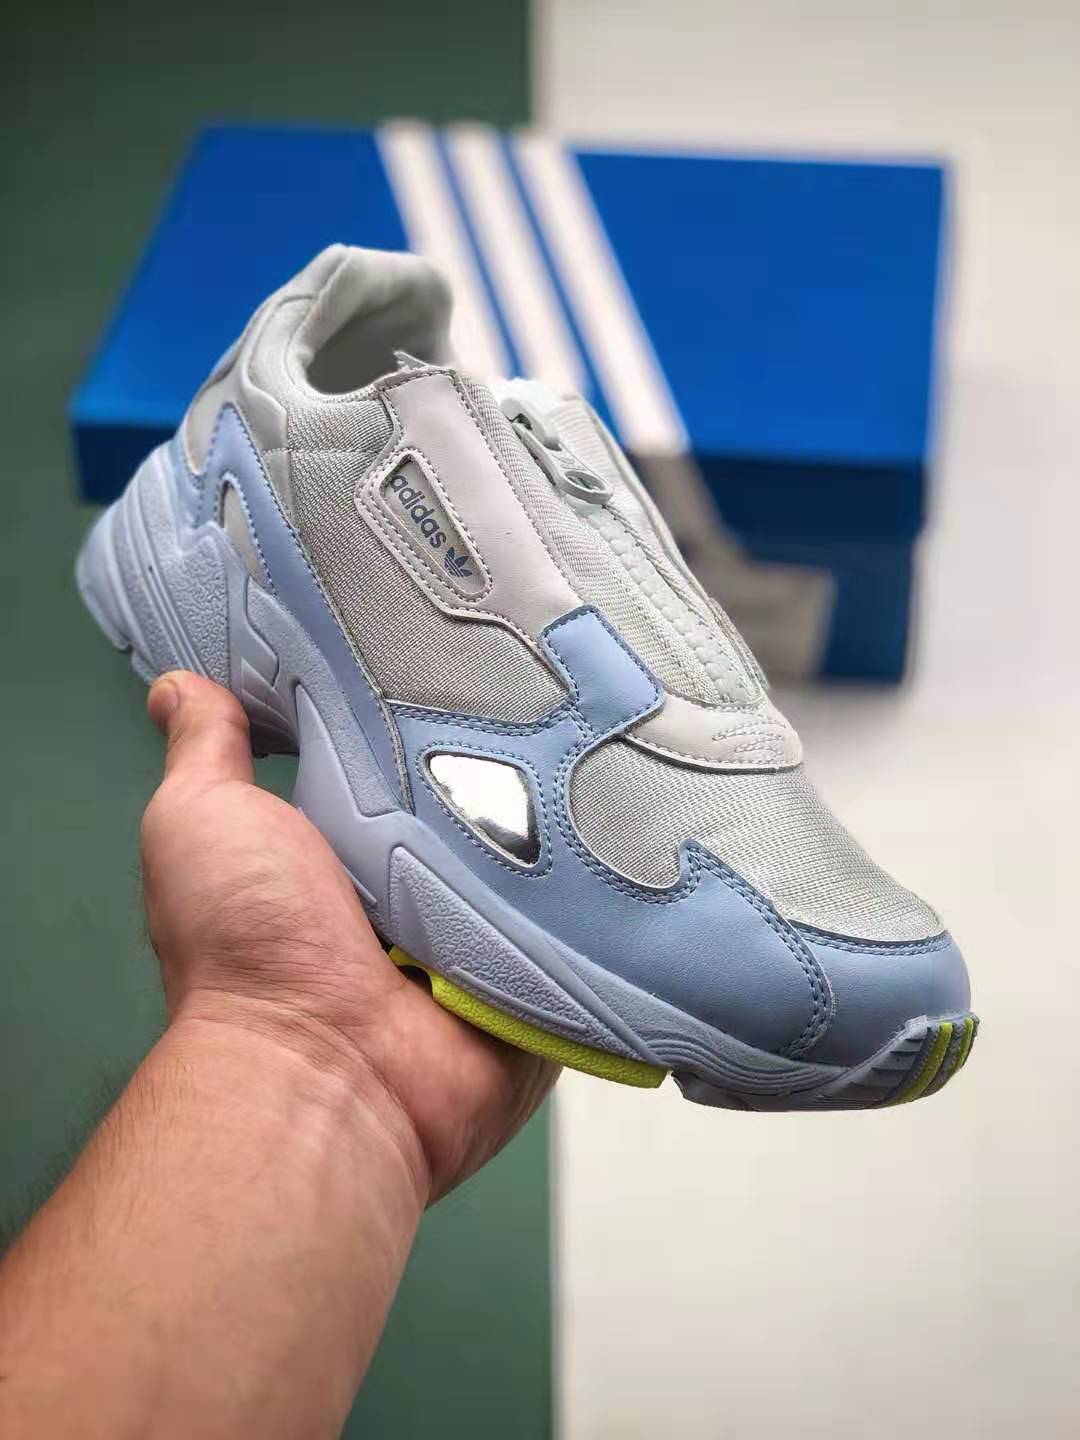 Adidas Falcon Zip 'Glow Blue Volt' EF1969 - Stylish Sneakers for Men and Women